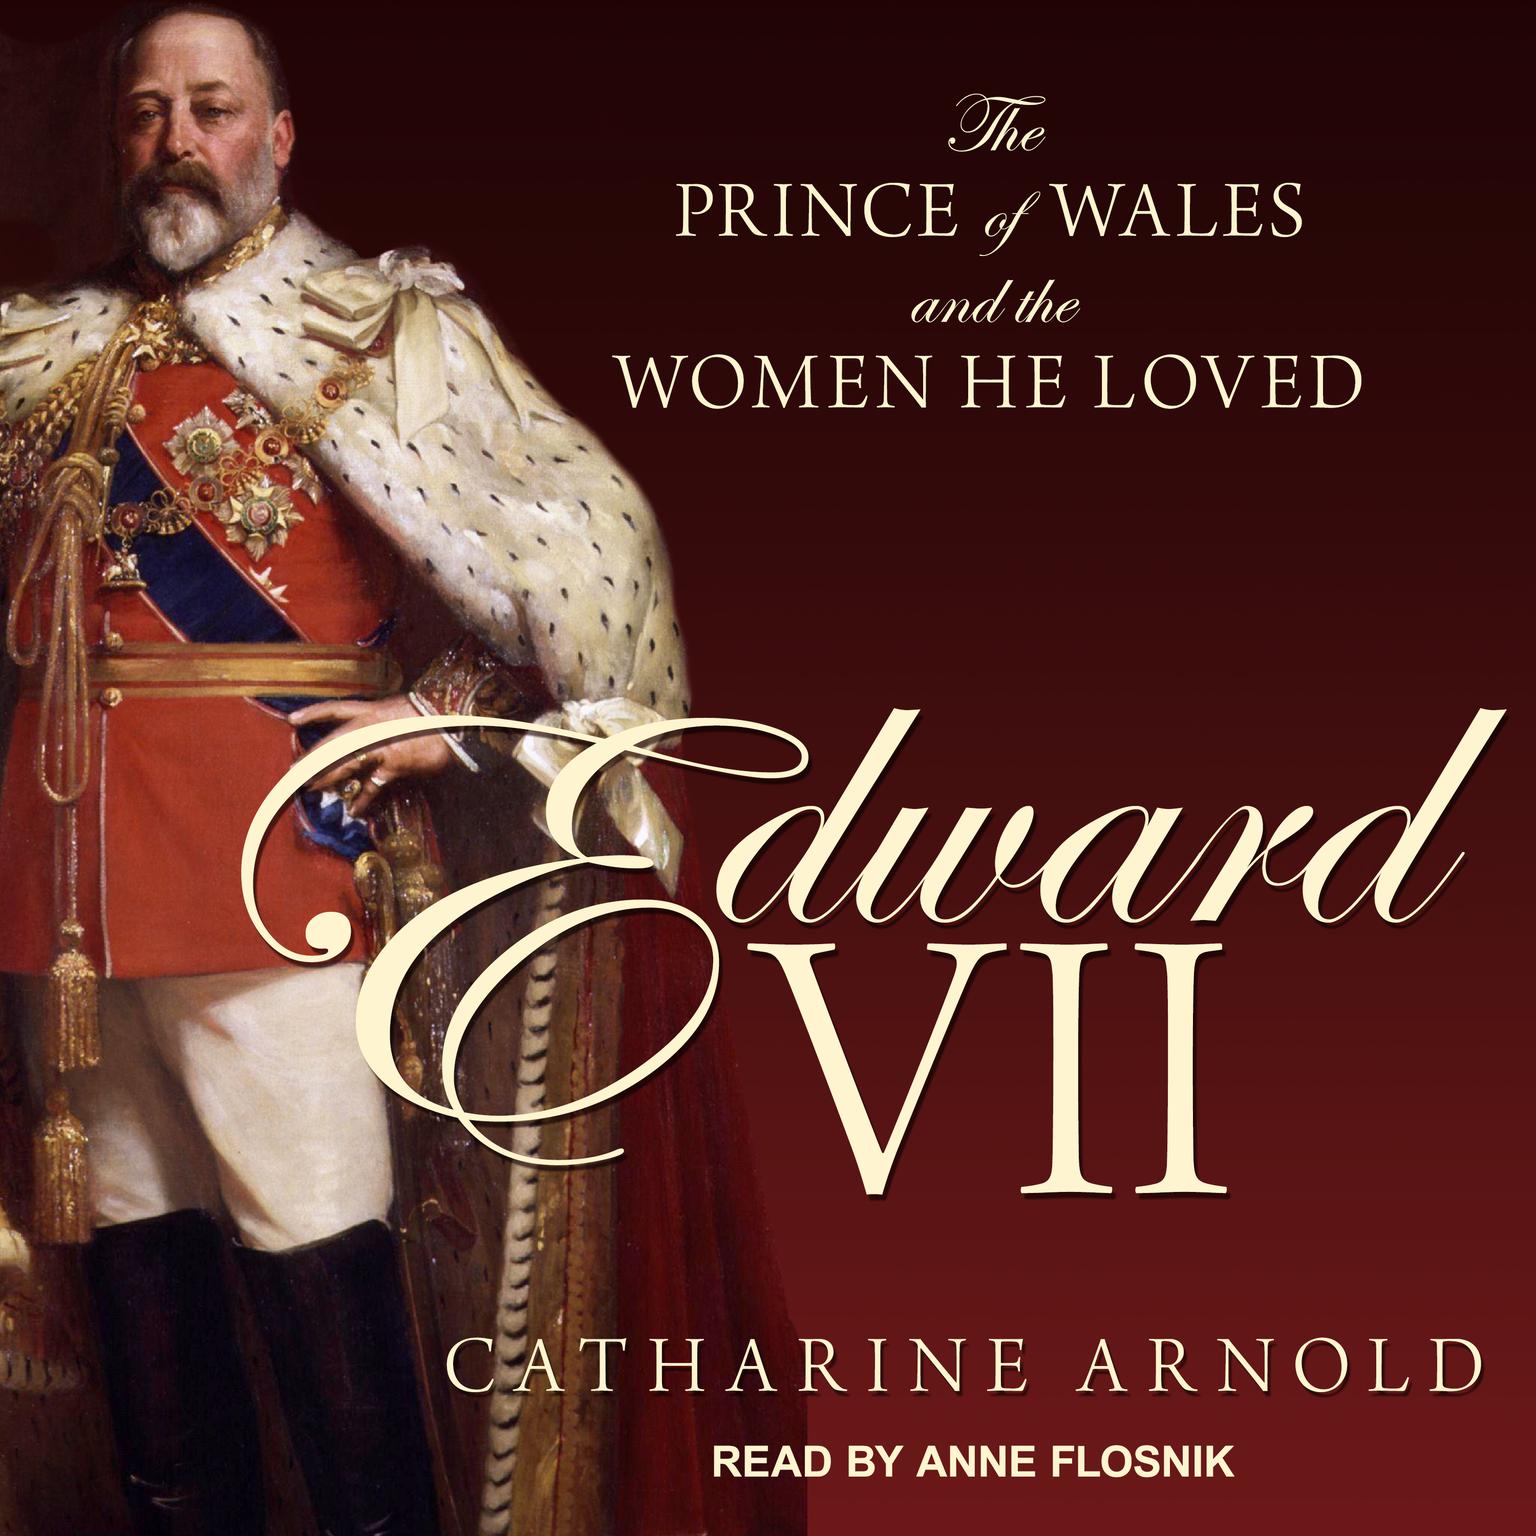 Edward VII: The Prince of Wales and the Women He Loved Audiobook, by Catharine Arnold